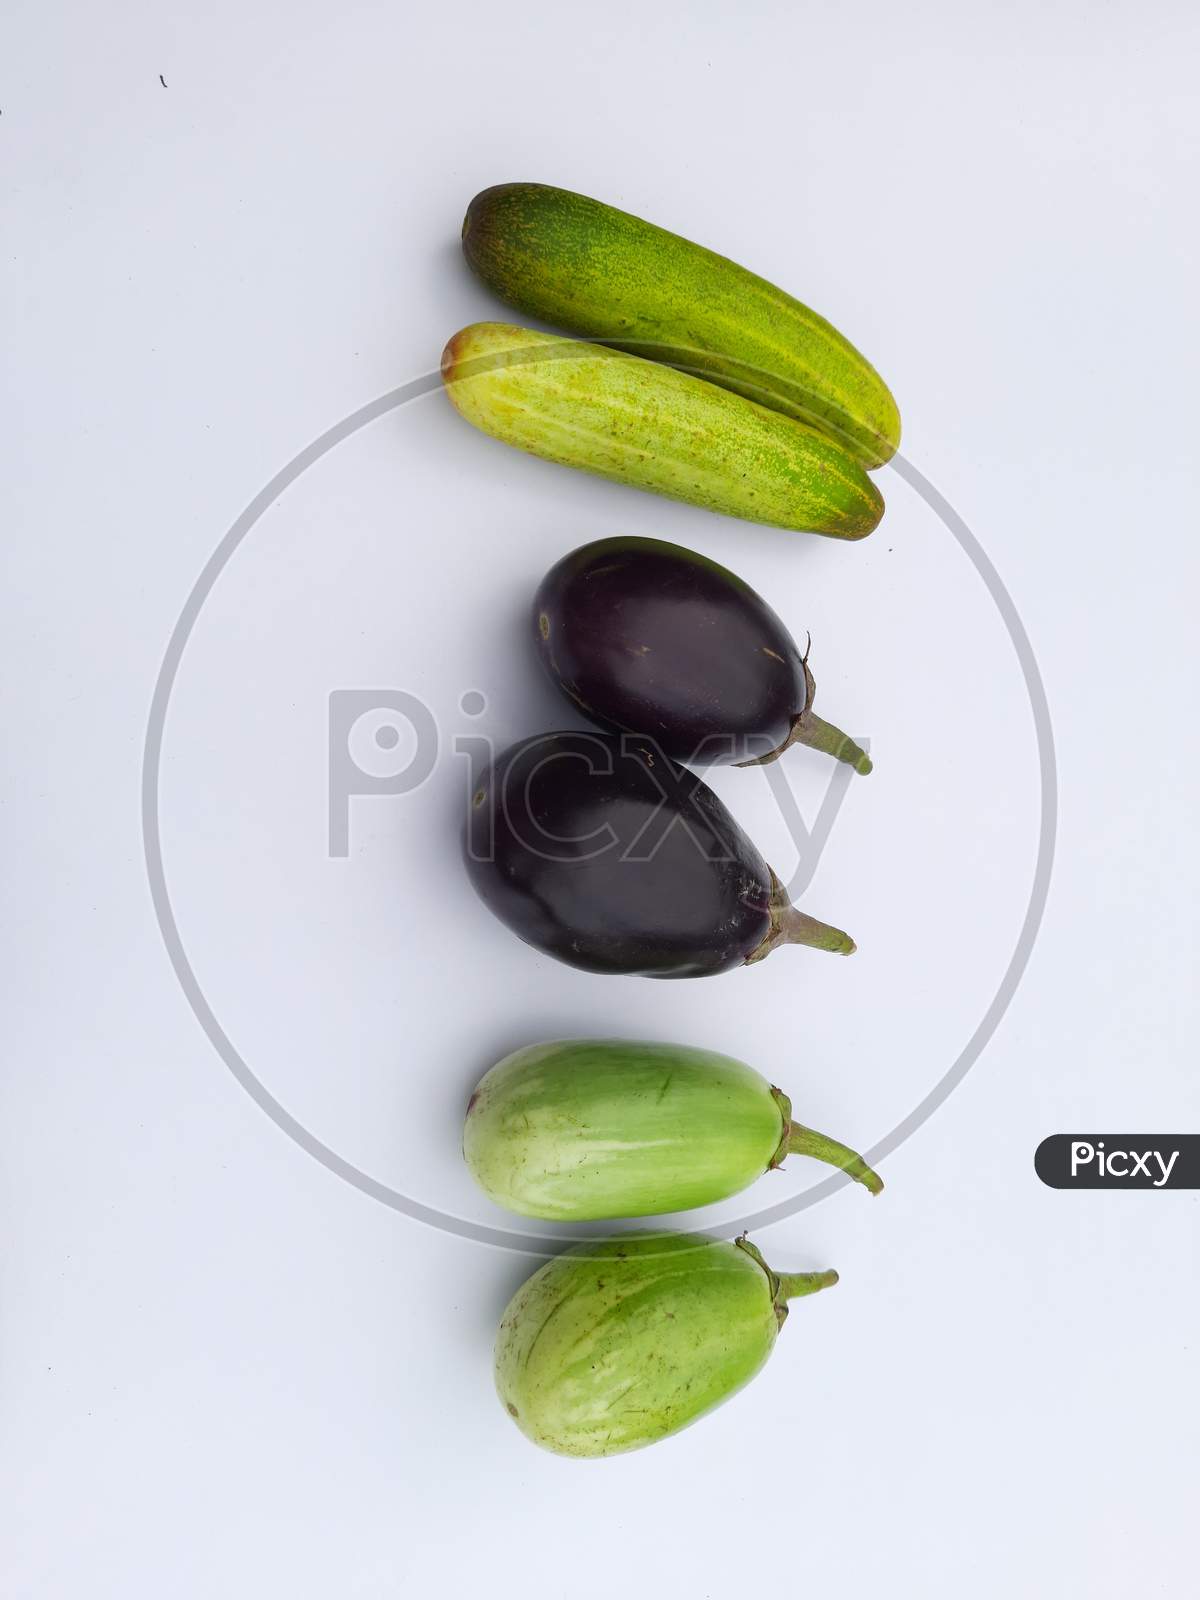 Black and Green Eggplant image in white Background, Different types Eggplant Vegetable image, Background Blur